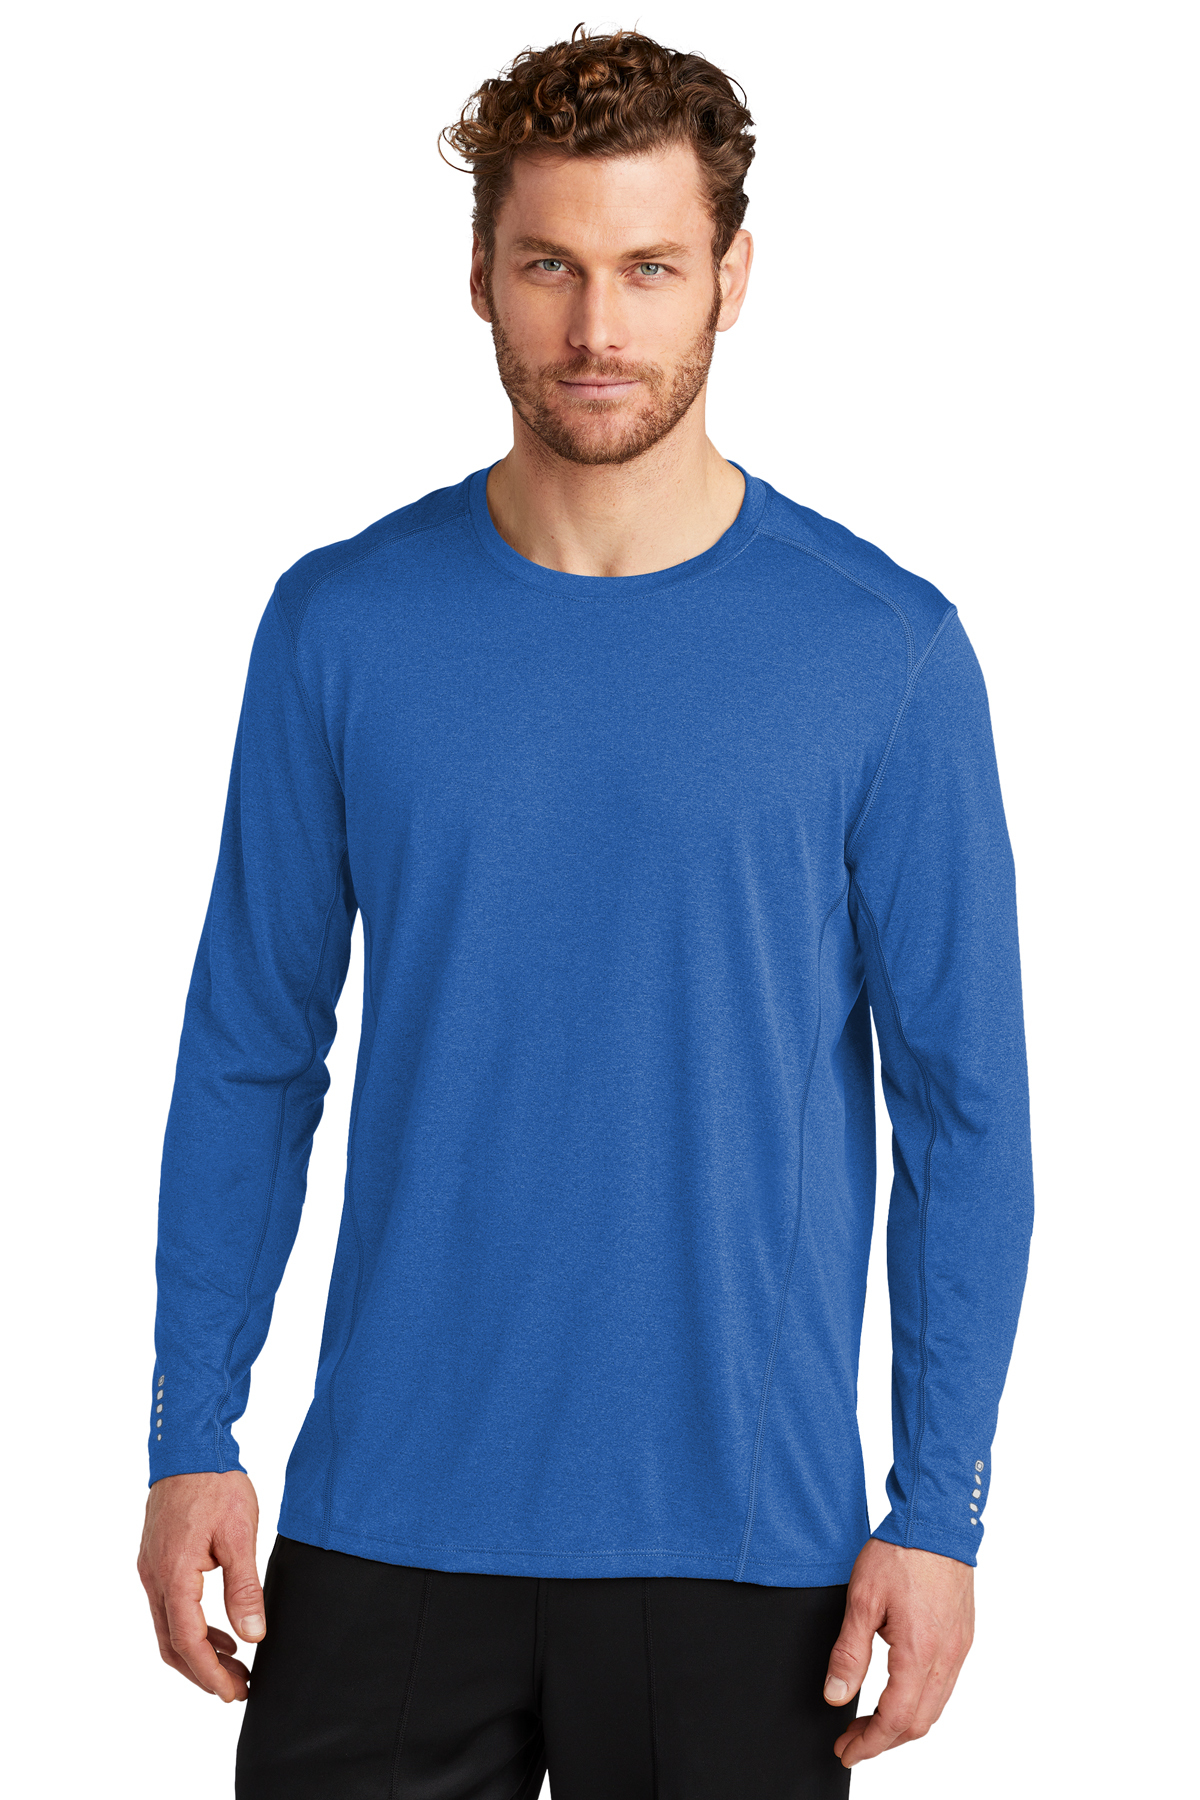 OGIO ® Long Sleeve Pulse Crew | Product | Company Casuals